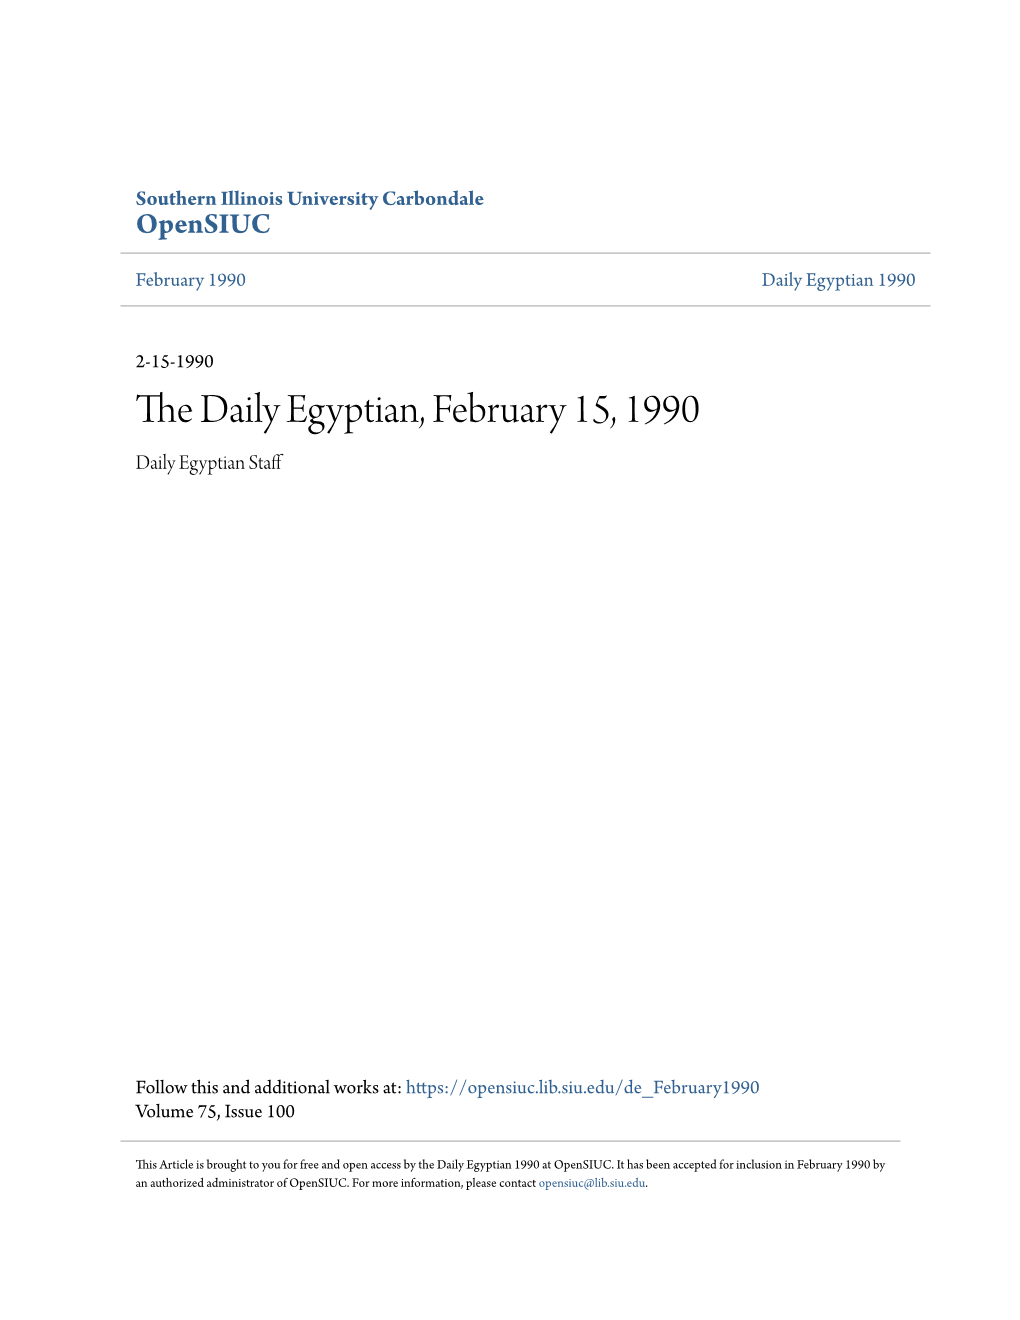 The Daily Egyptian, February 15, 1990